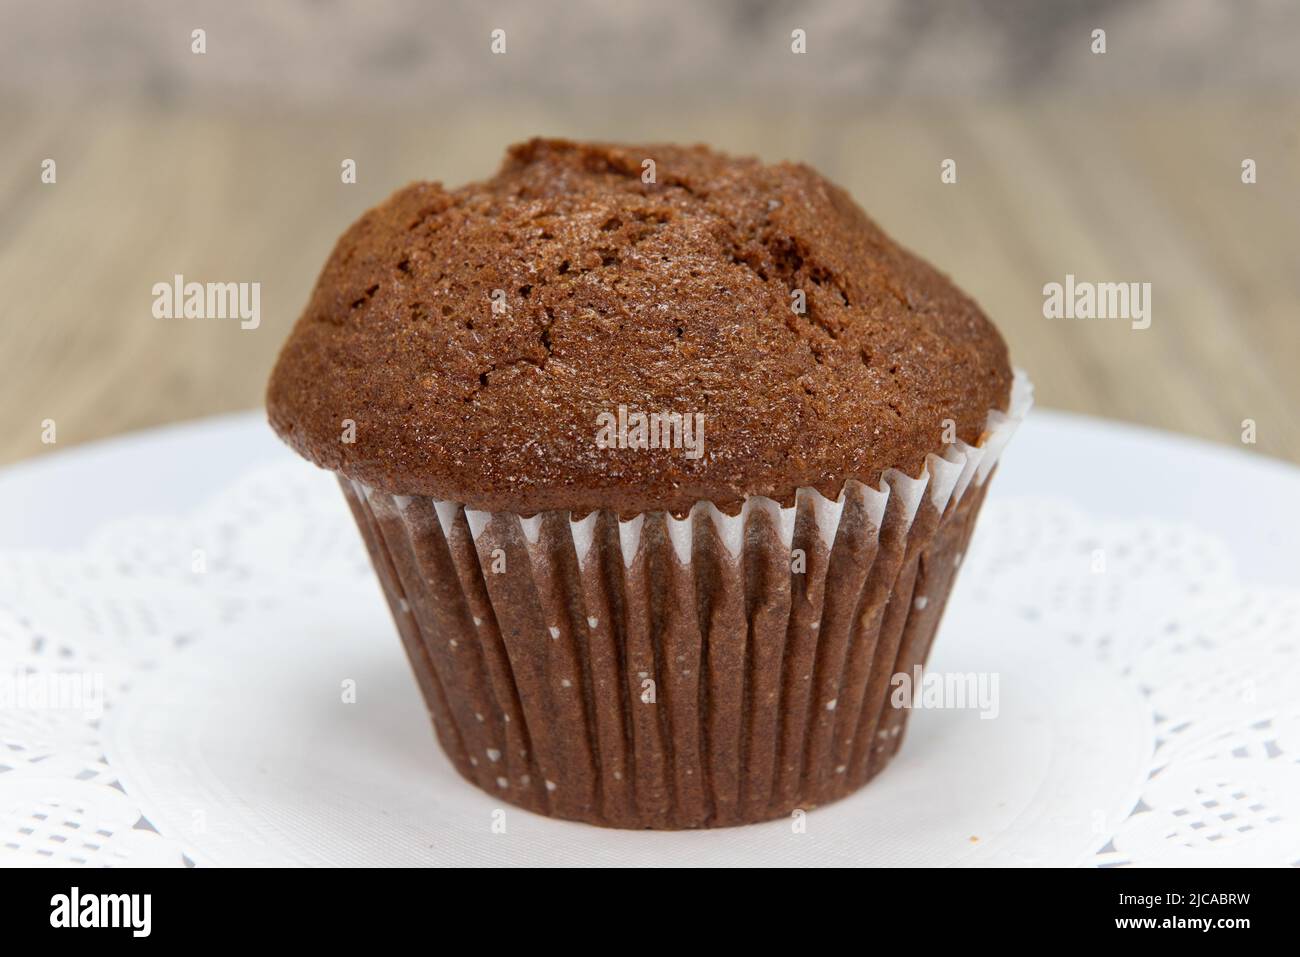 Tempting fresh from the oven bran muffin from the bakery served on a plate. Stock Photo